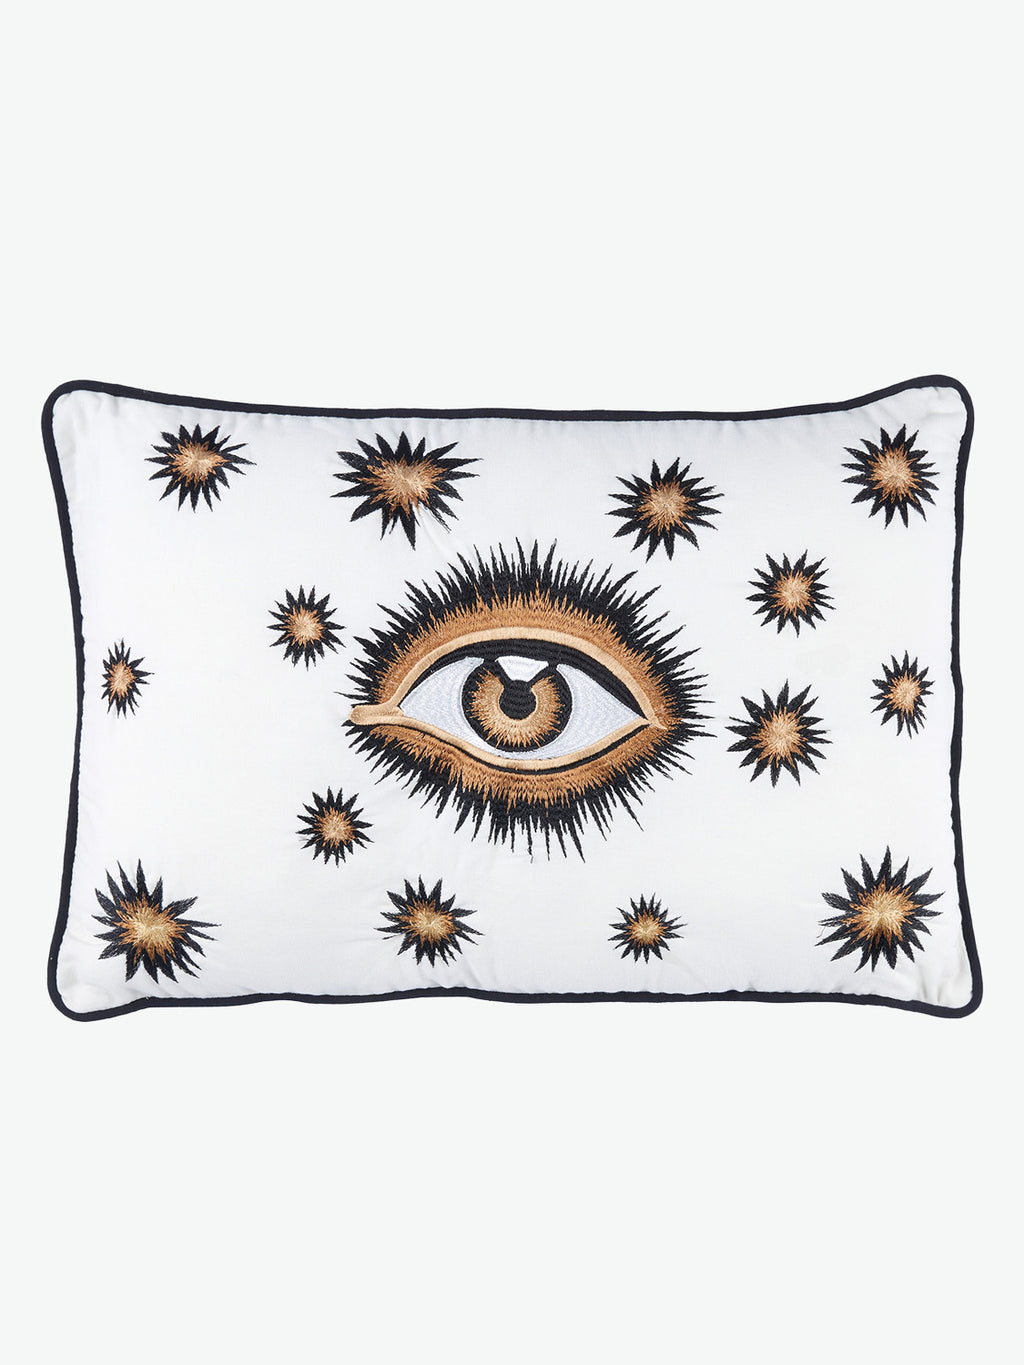 Les Ottomans Eye Hand-Embroidered Cushion